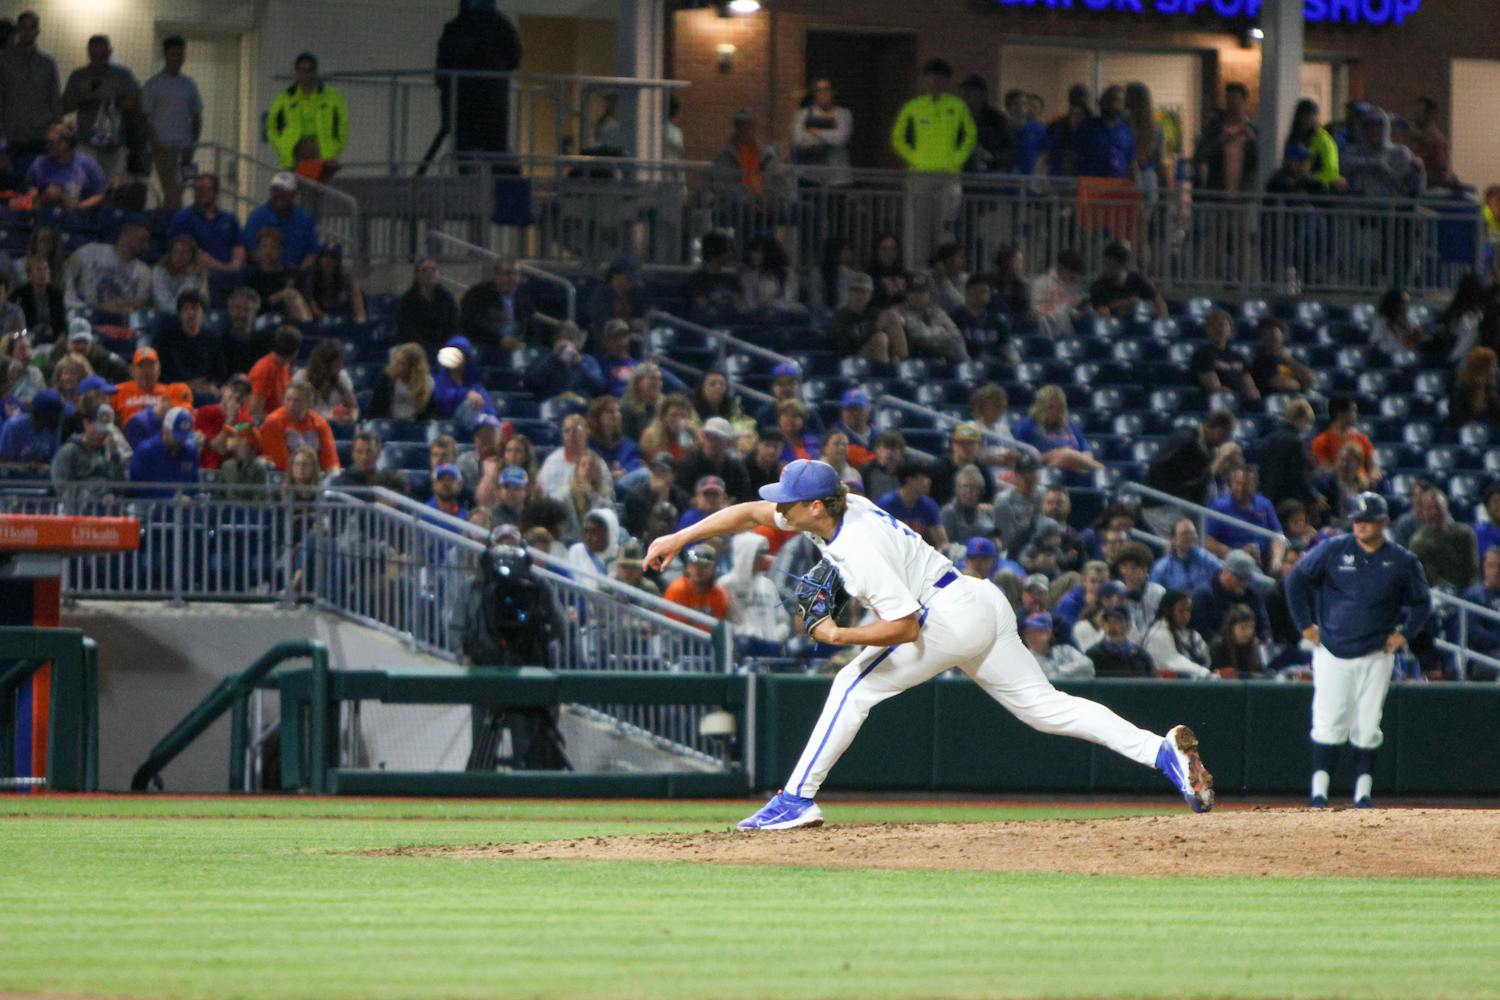 Gator baseball preview: Pitchers - The Independent Florida Alligator